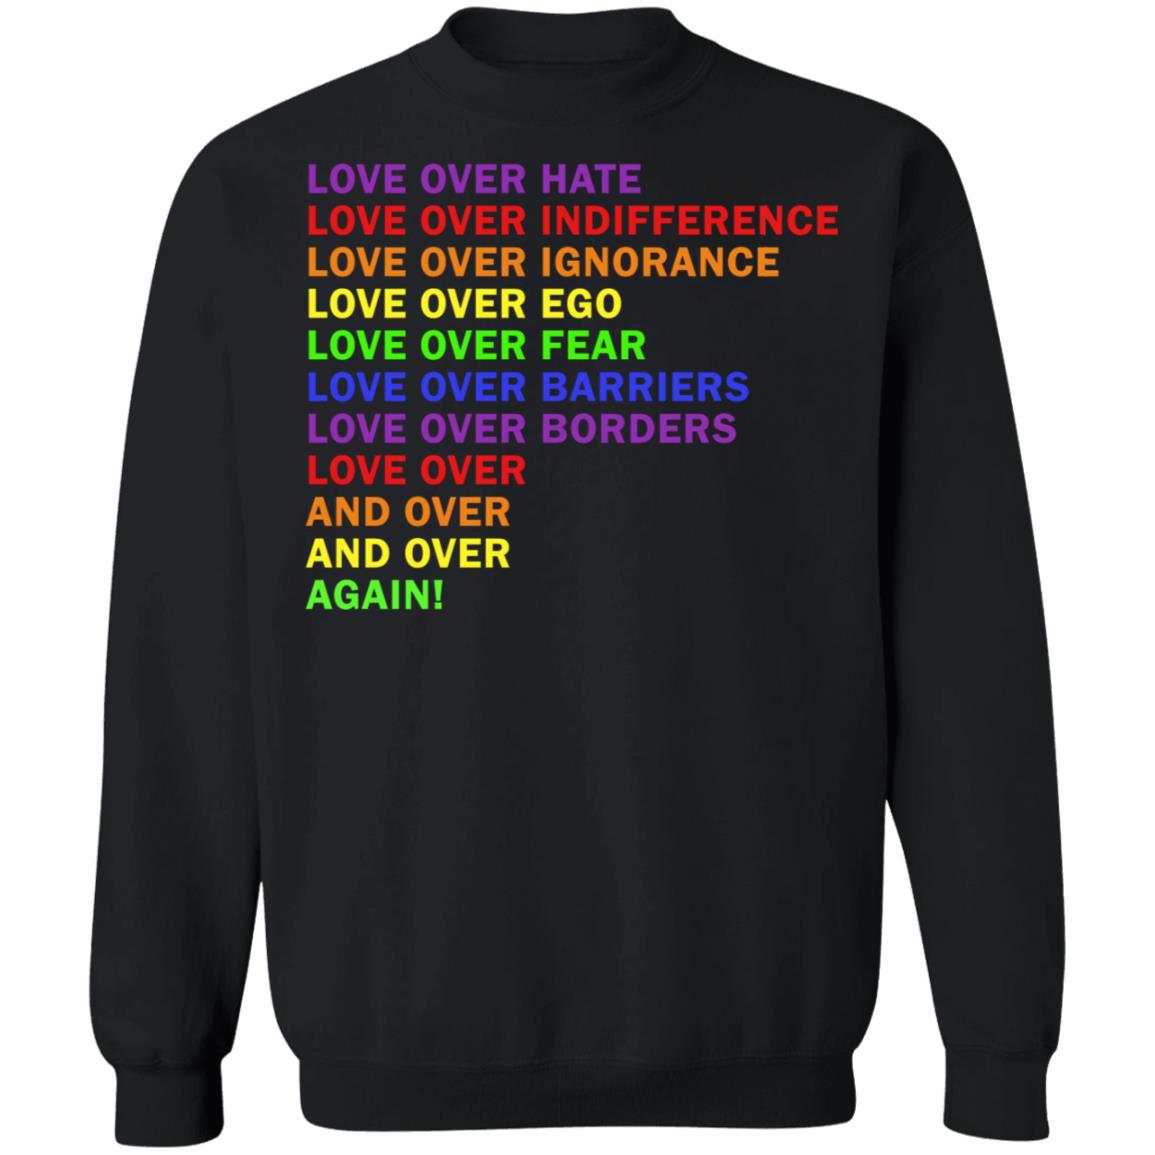 LOVE over hate LOVE over indifference Shirt